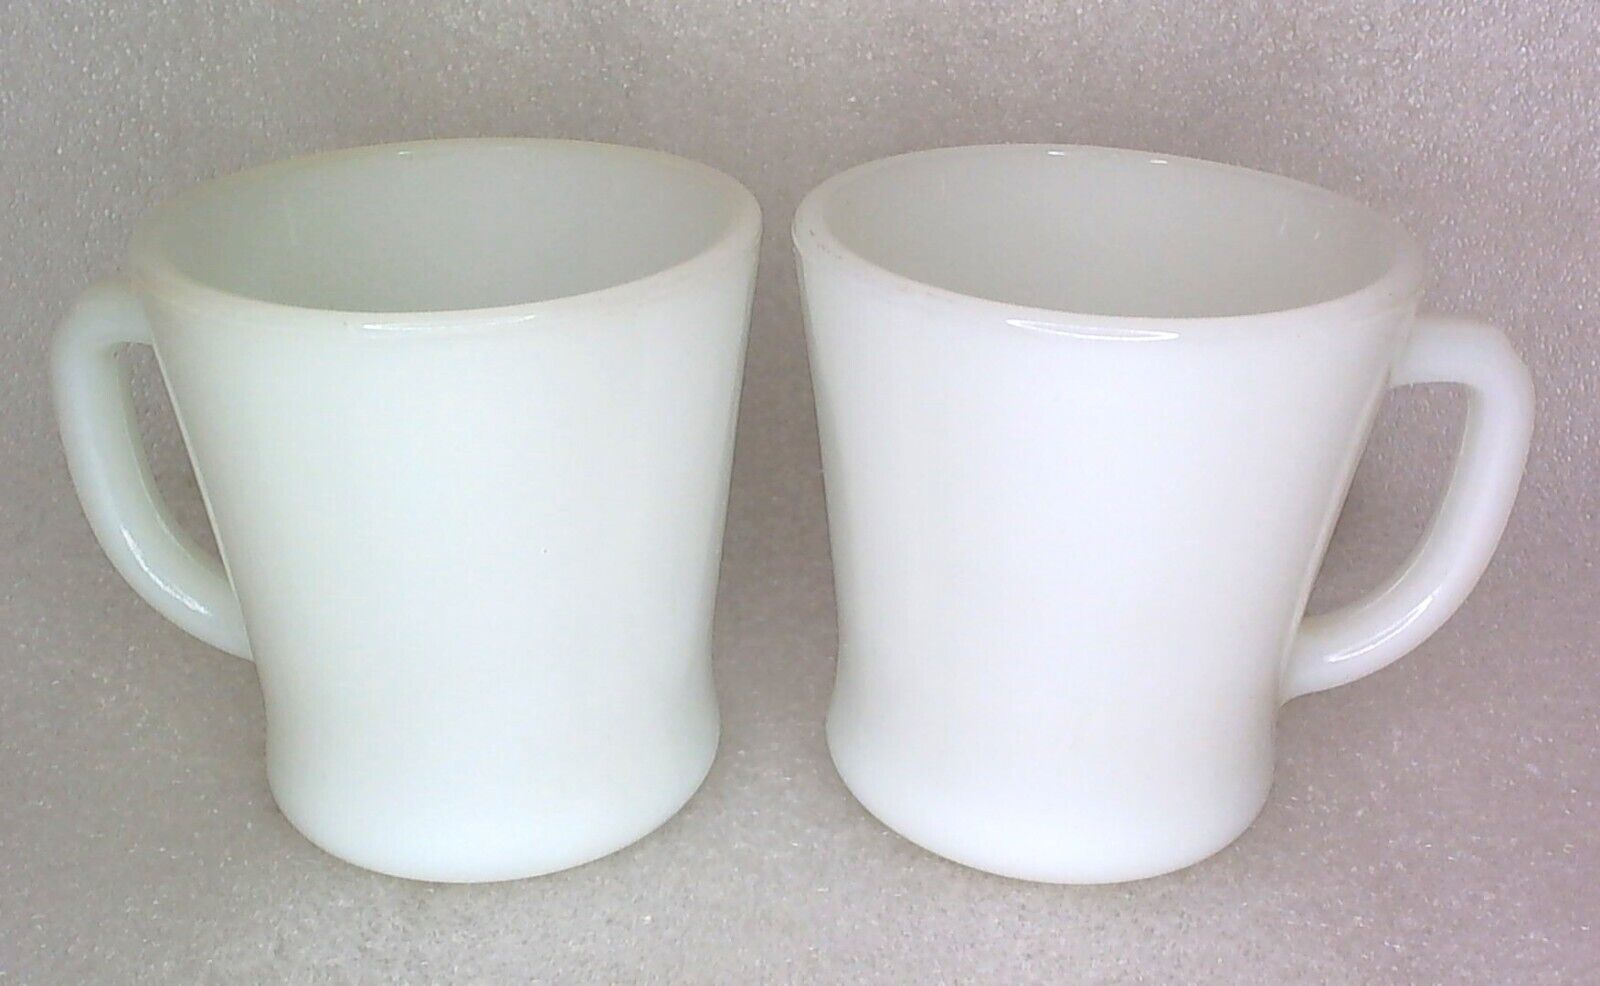 FIRE KING MUGS, MILK WHITE, OVEN FIRE-KING WARE MADE IN U.S.A. 1954-1966